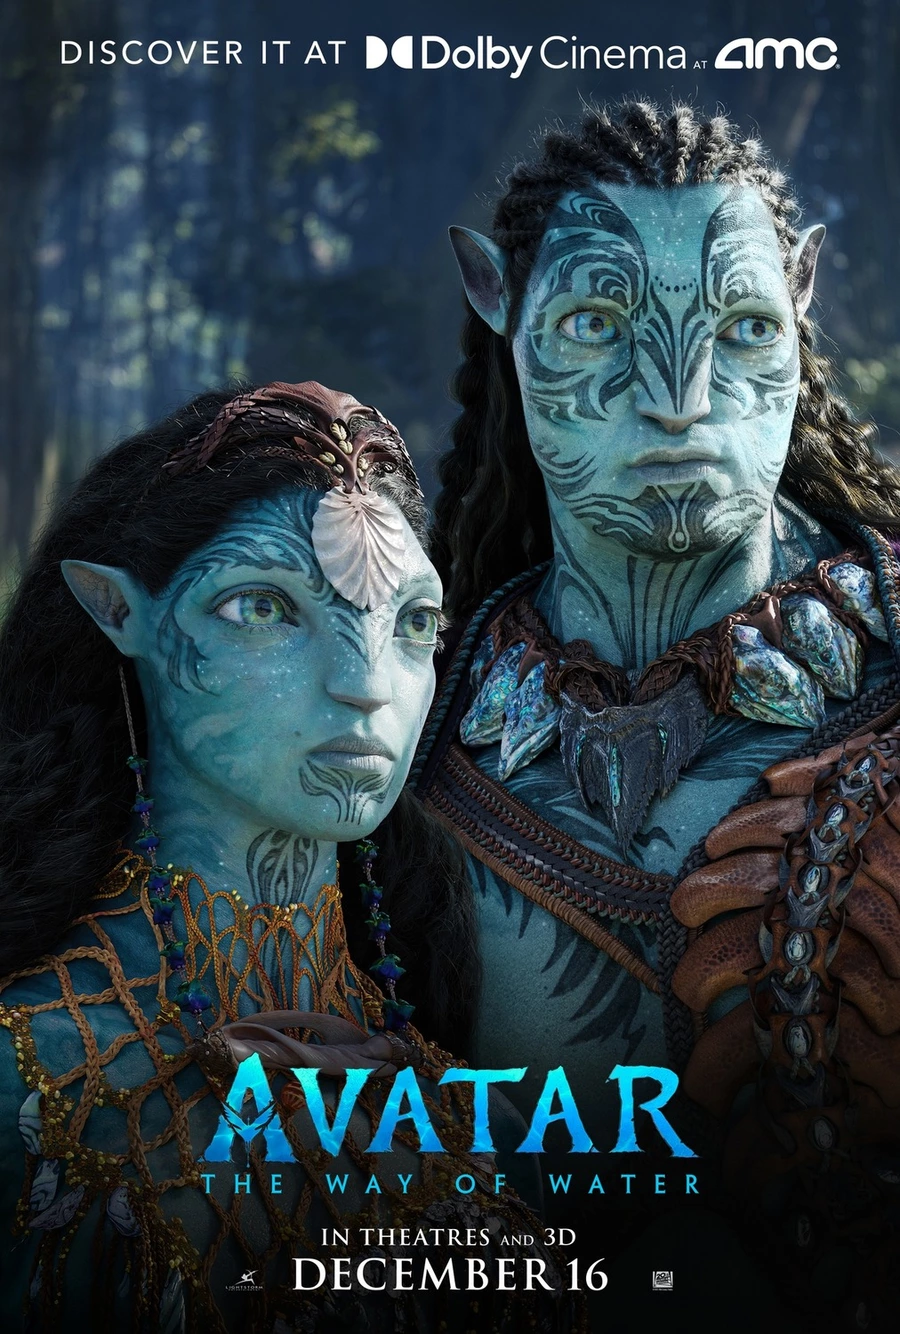 A series of posters for the fantastic film «Avatar: The Way of Water», which will be released in cinemas on December 16.